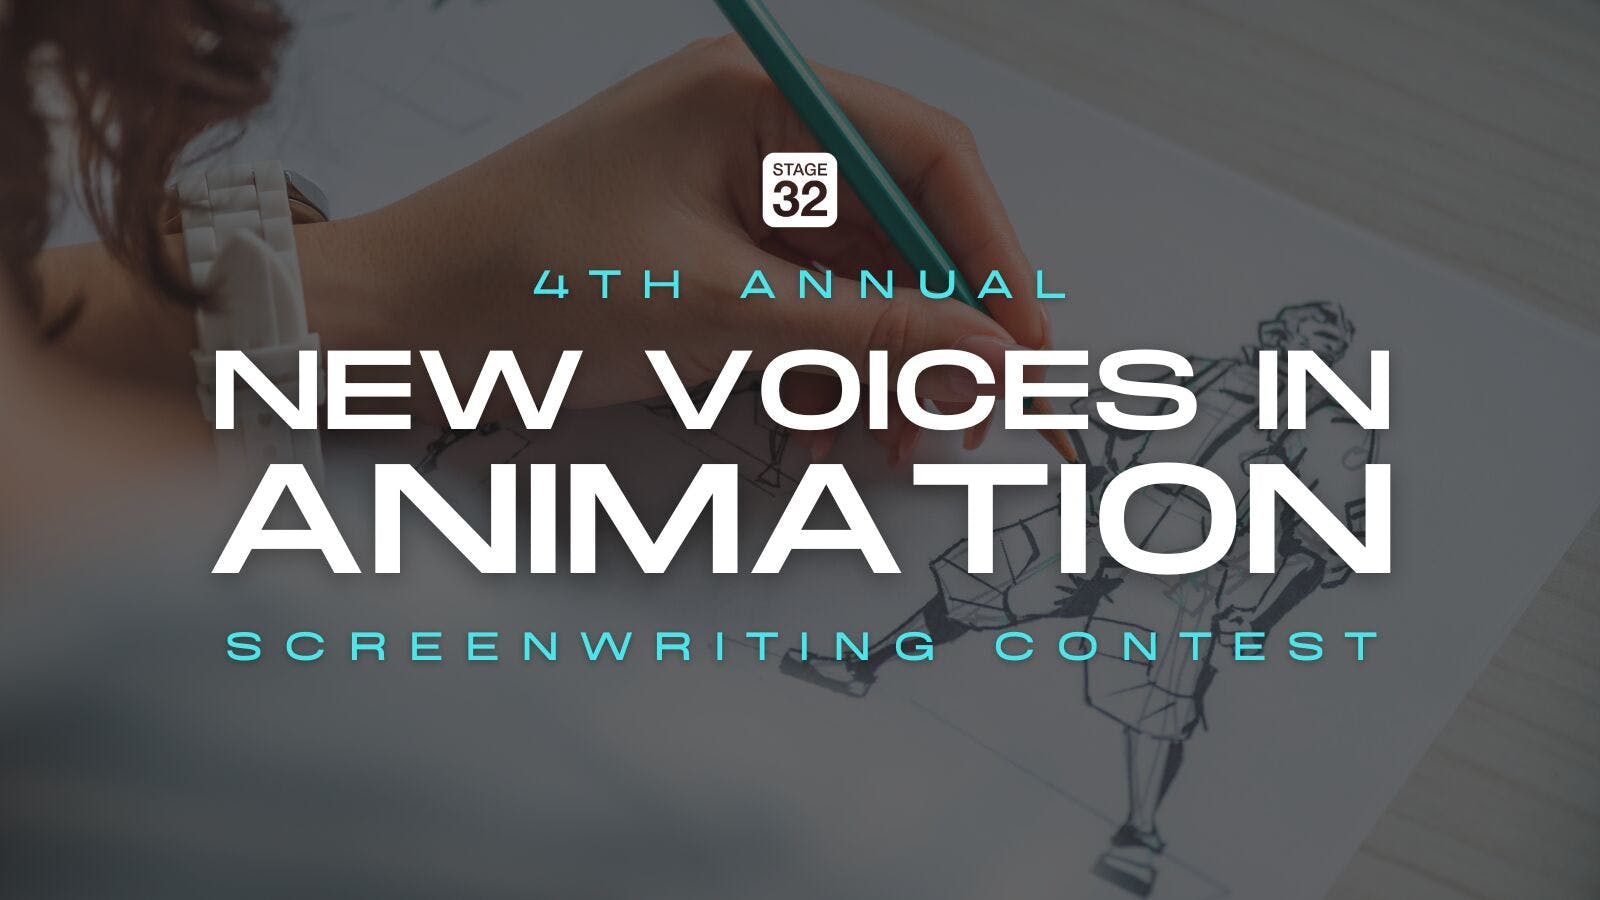 Announcing The 4th Annual New Voices In Animation Screenwriting Contest